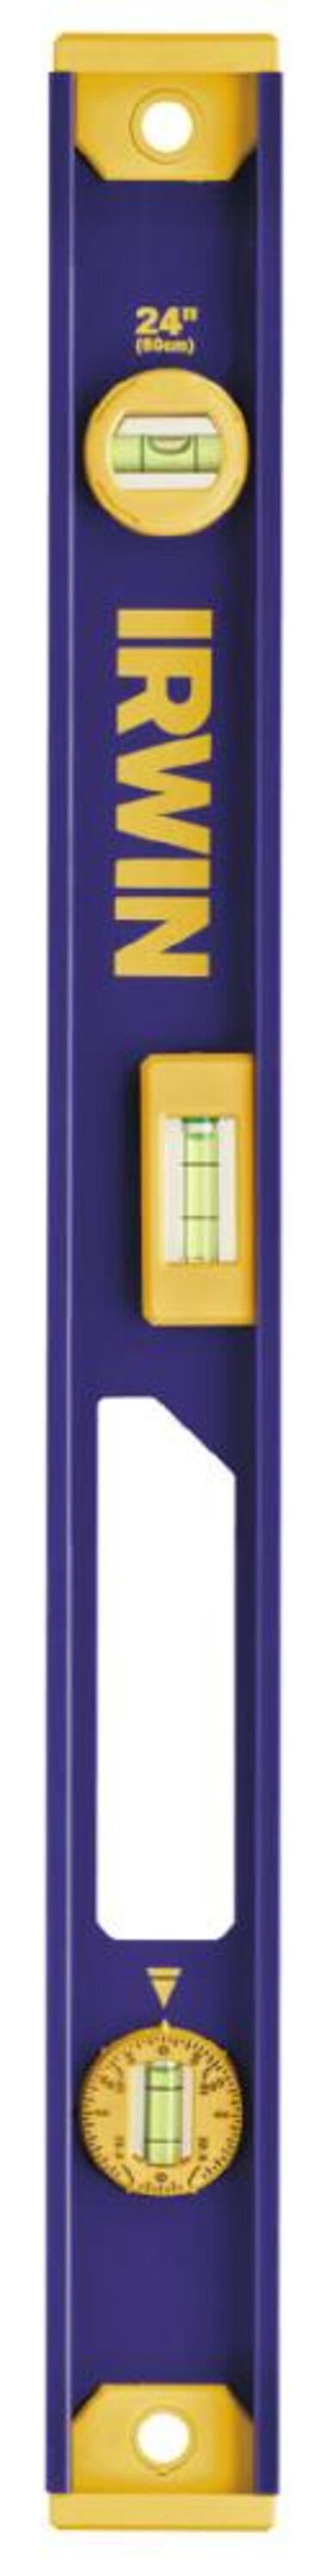 Irwin 24 In. 1050 Magnetic I-Beam Level, large image number 0